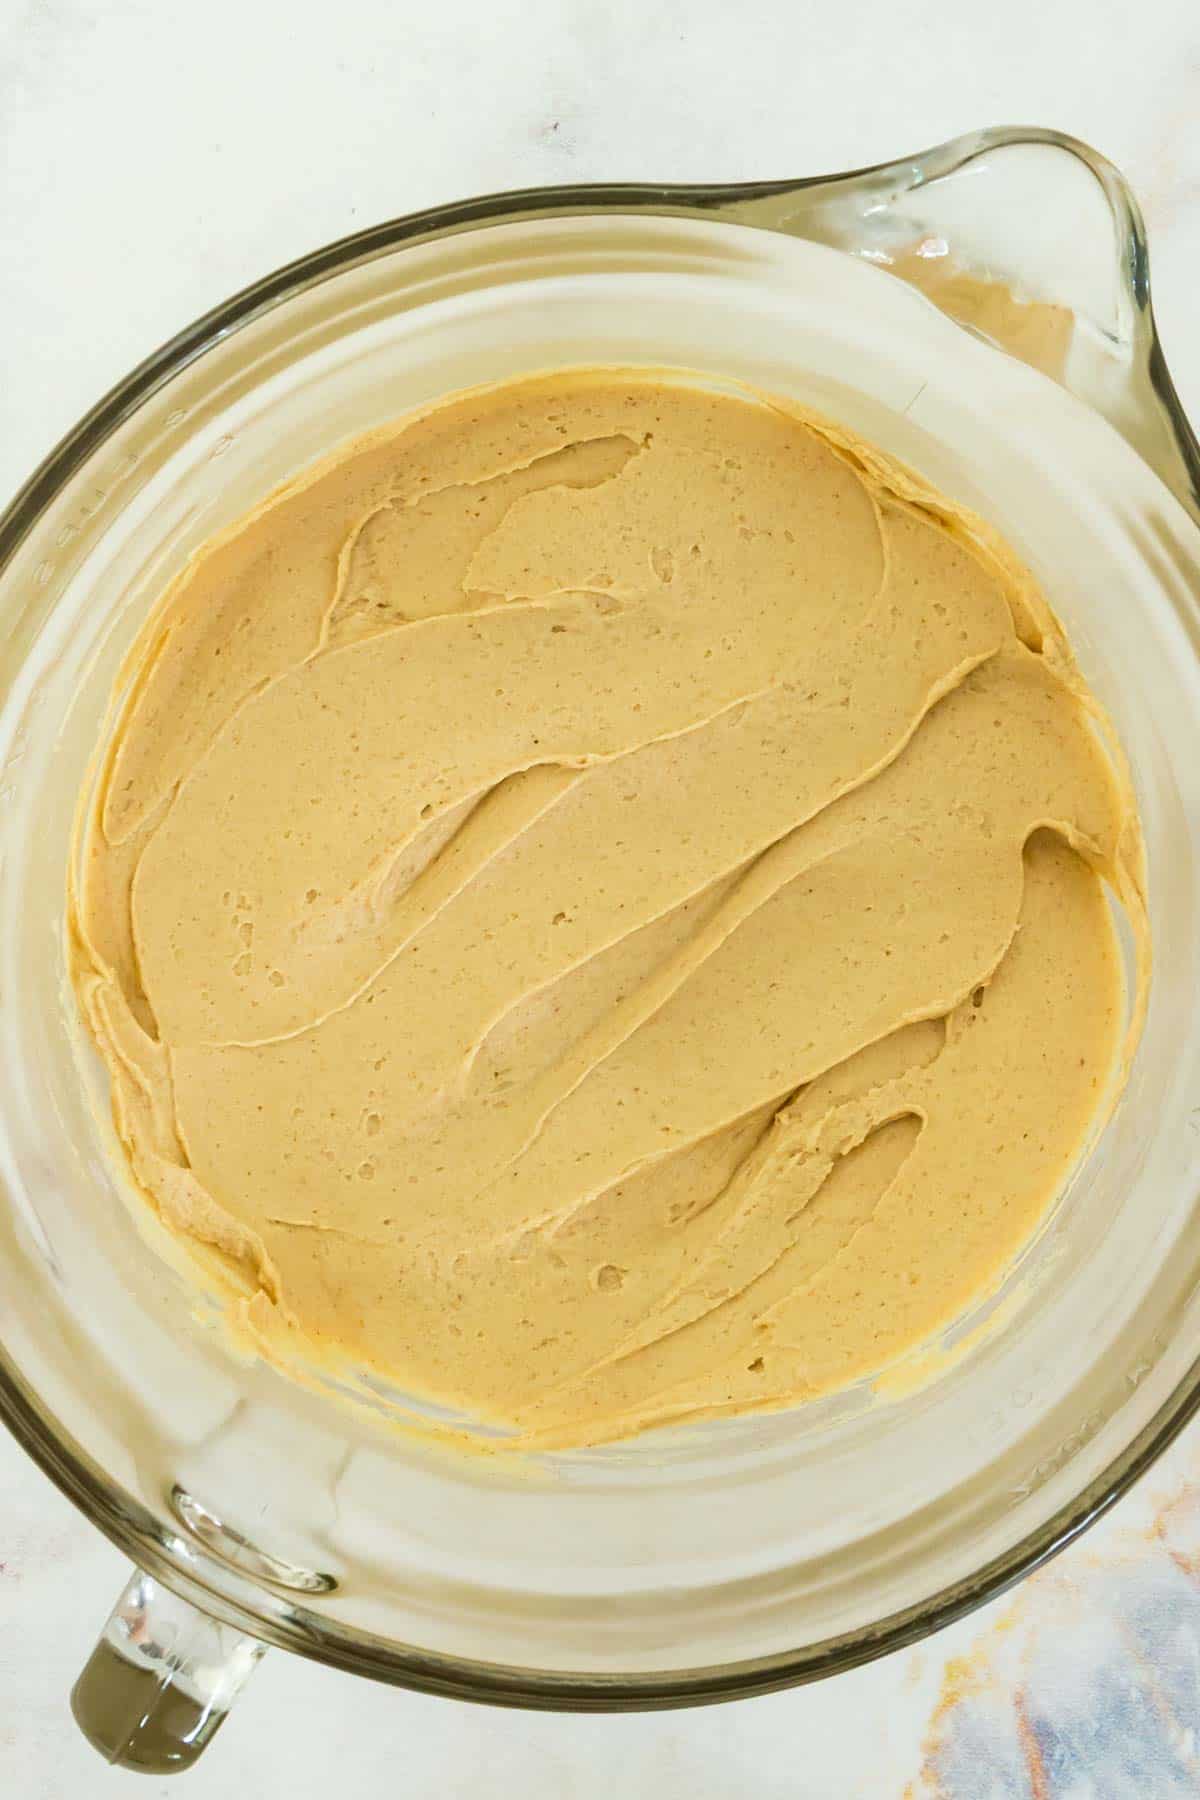 Peanut butter frosting is shown in a bowl.